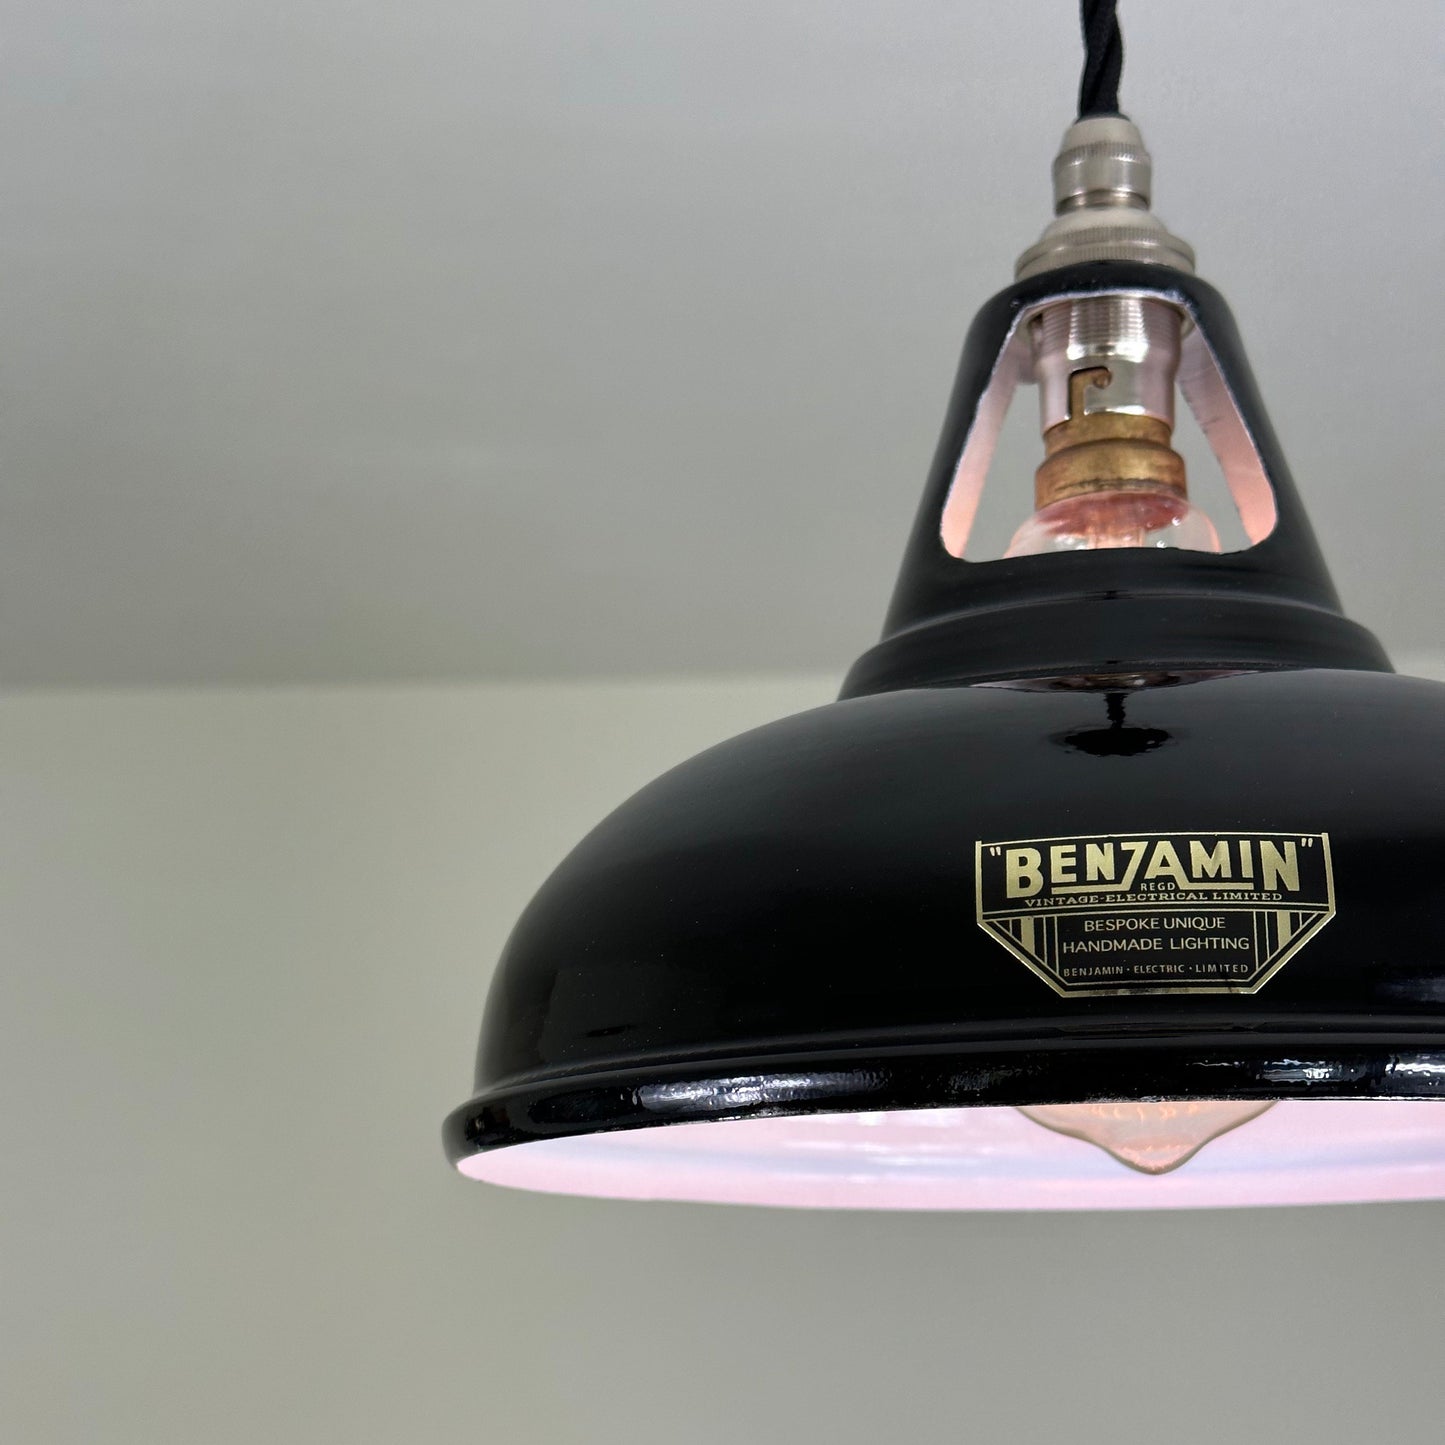 Cawston Small ~ Midnight Black Solid Industrial Slotted Design Shade Pendant Light | Ceiling Dining Room | Kitchen Table | Vintage 9 Inch